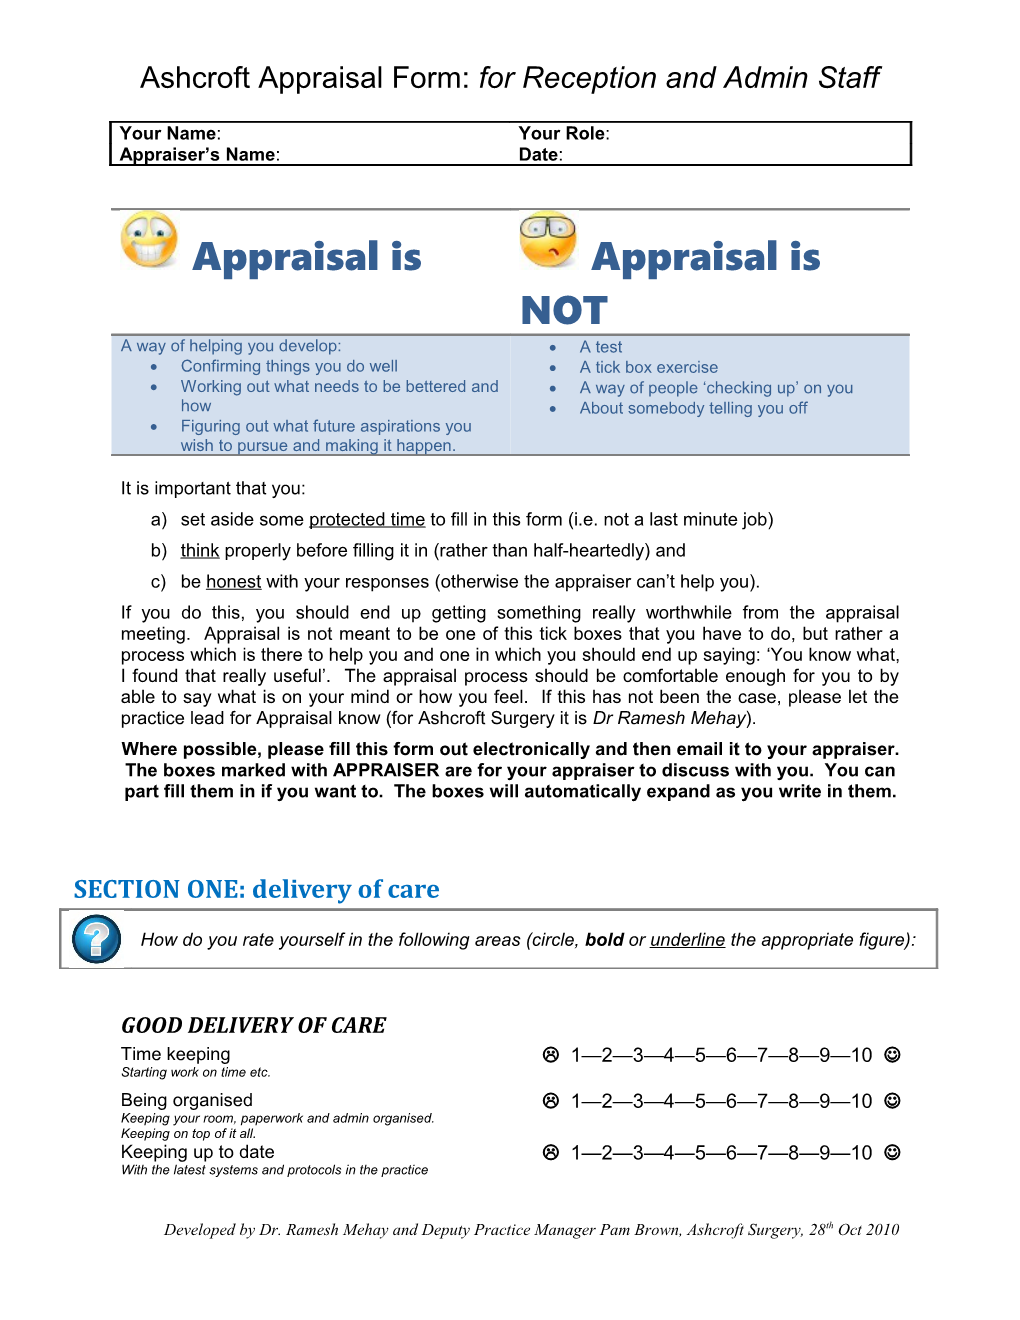 Ashcroft Appraisal Form:For Reception and Admin Staff